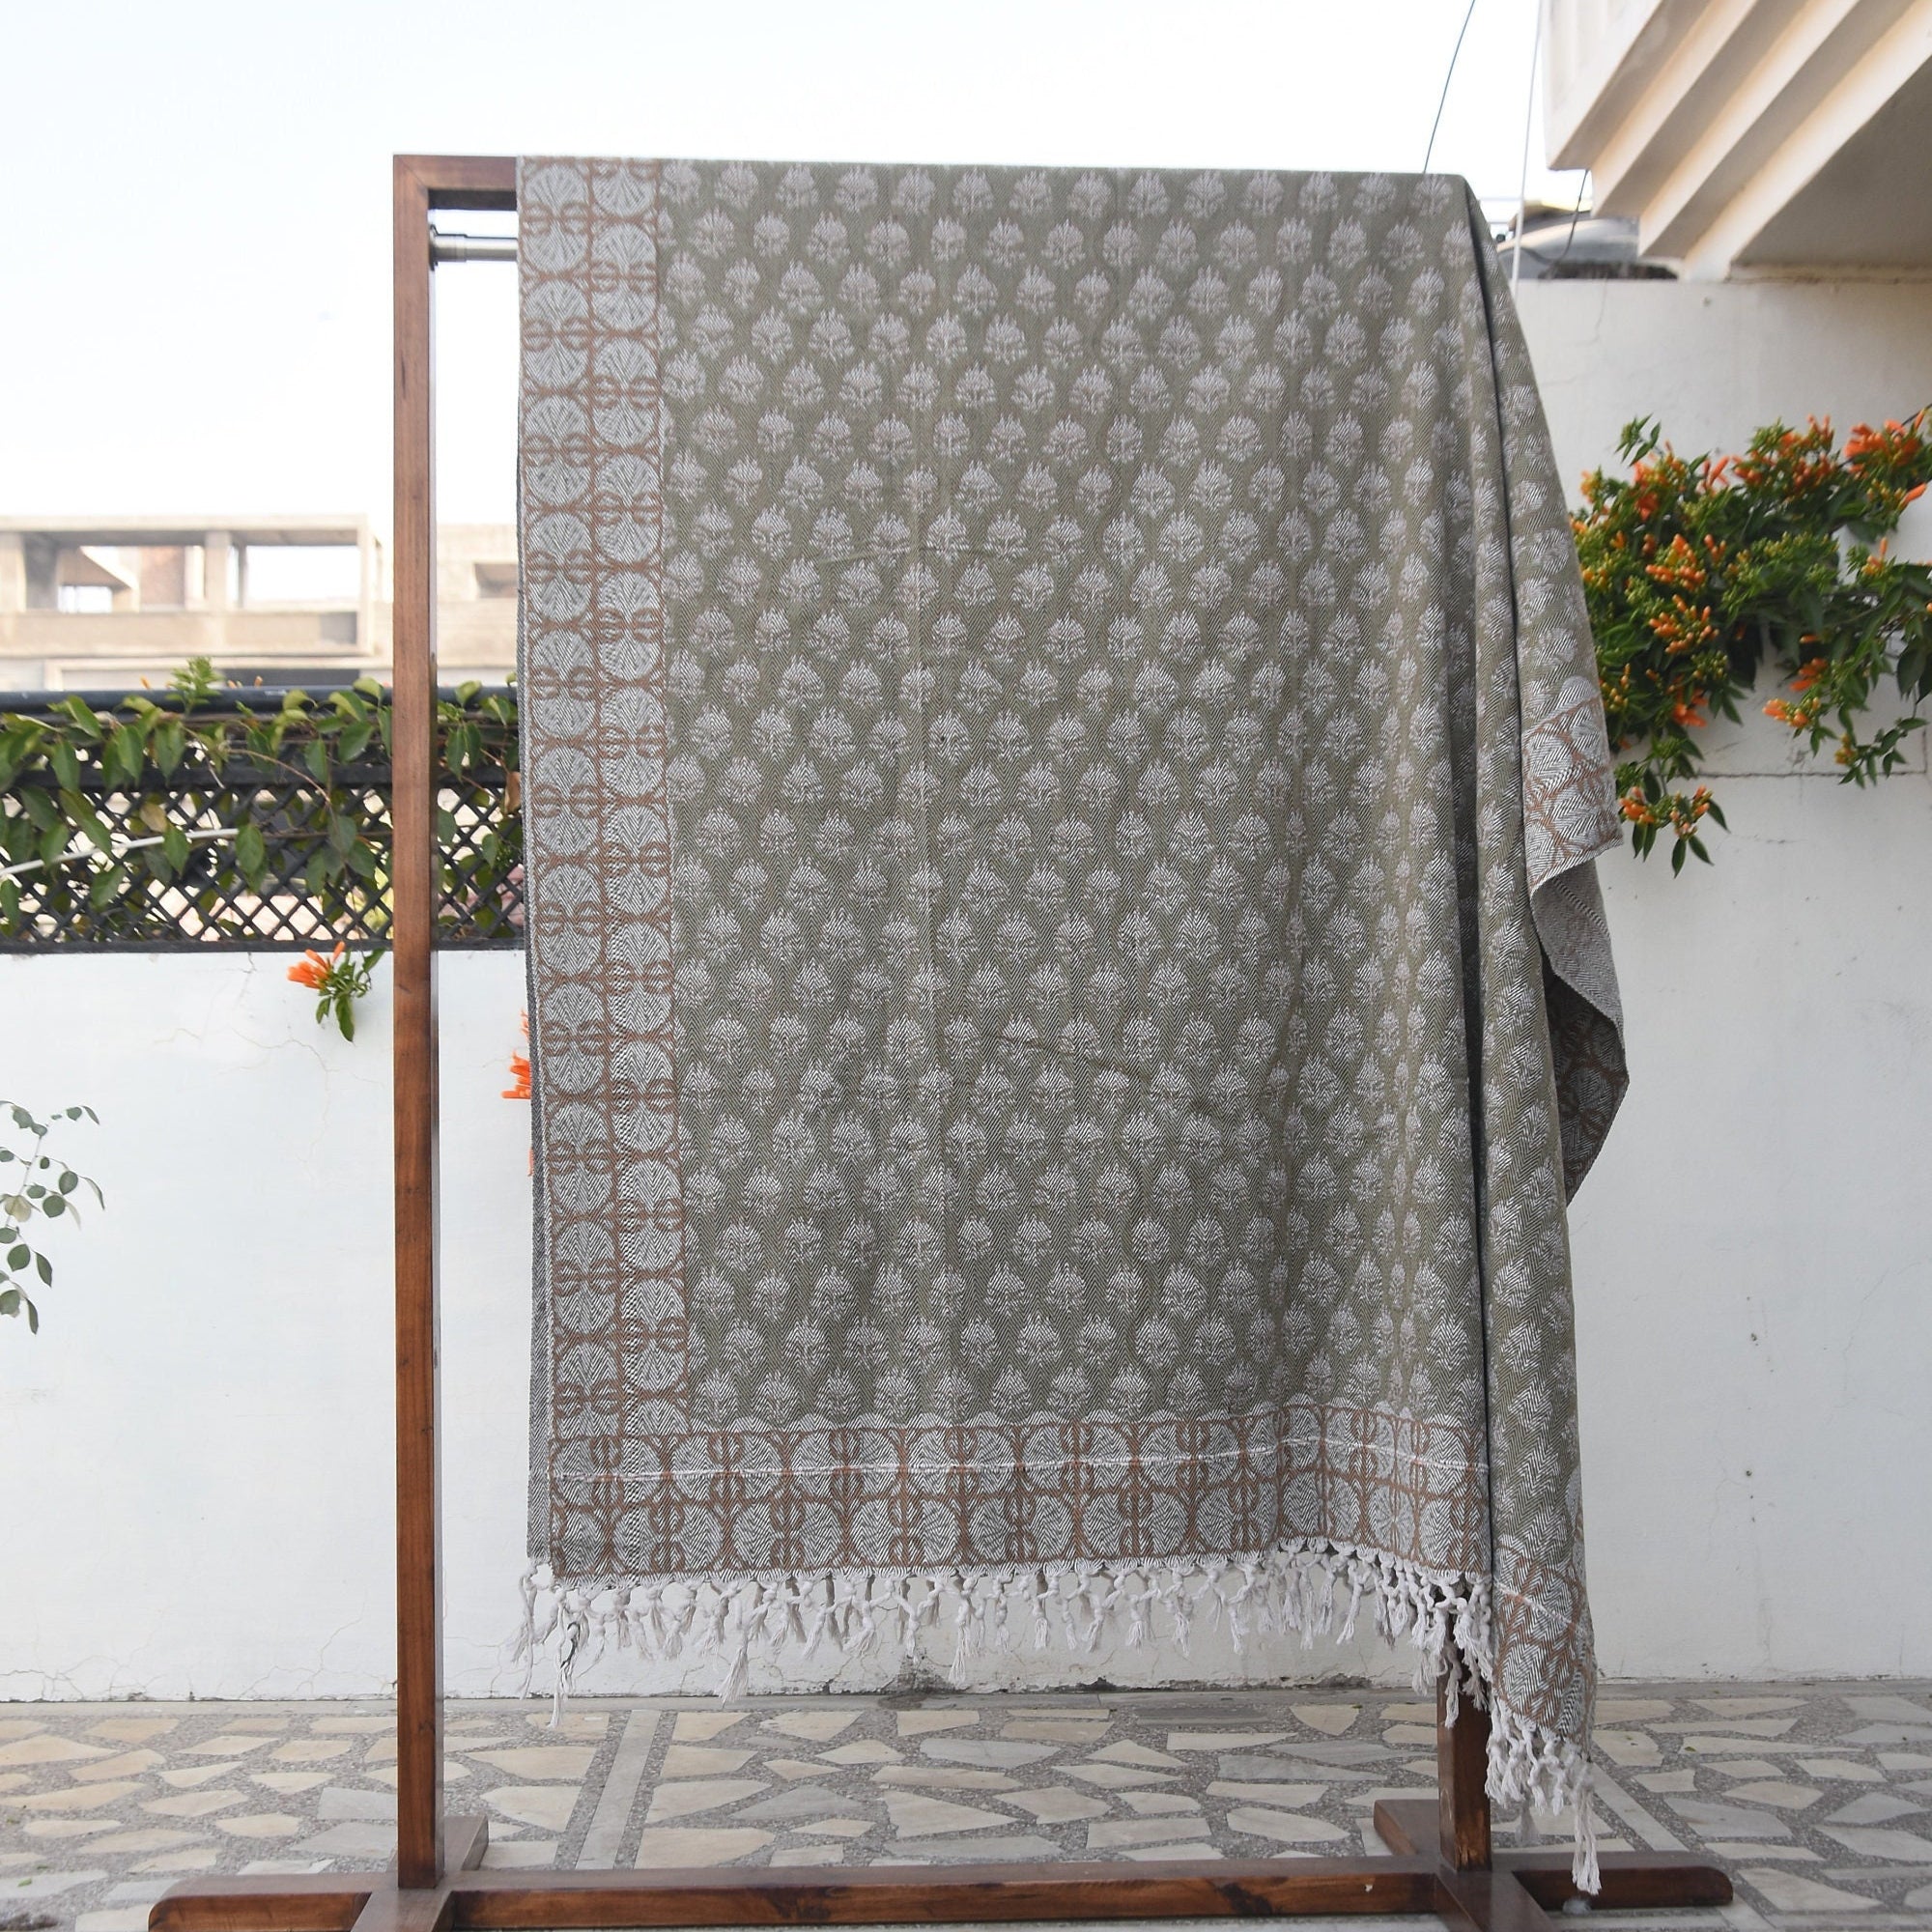 Block print handwoven throws, blankets and throws, handwoven handloom fabric, Woven throw blanket - CHHATRI